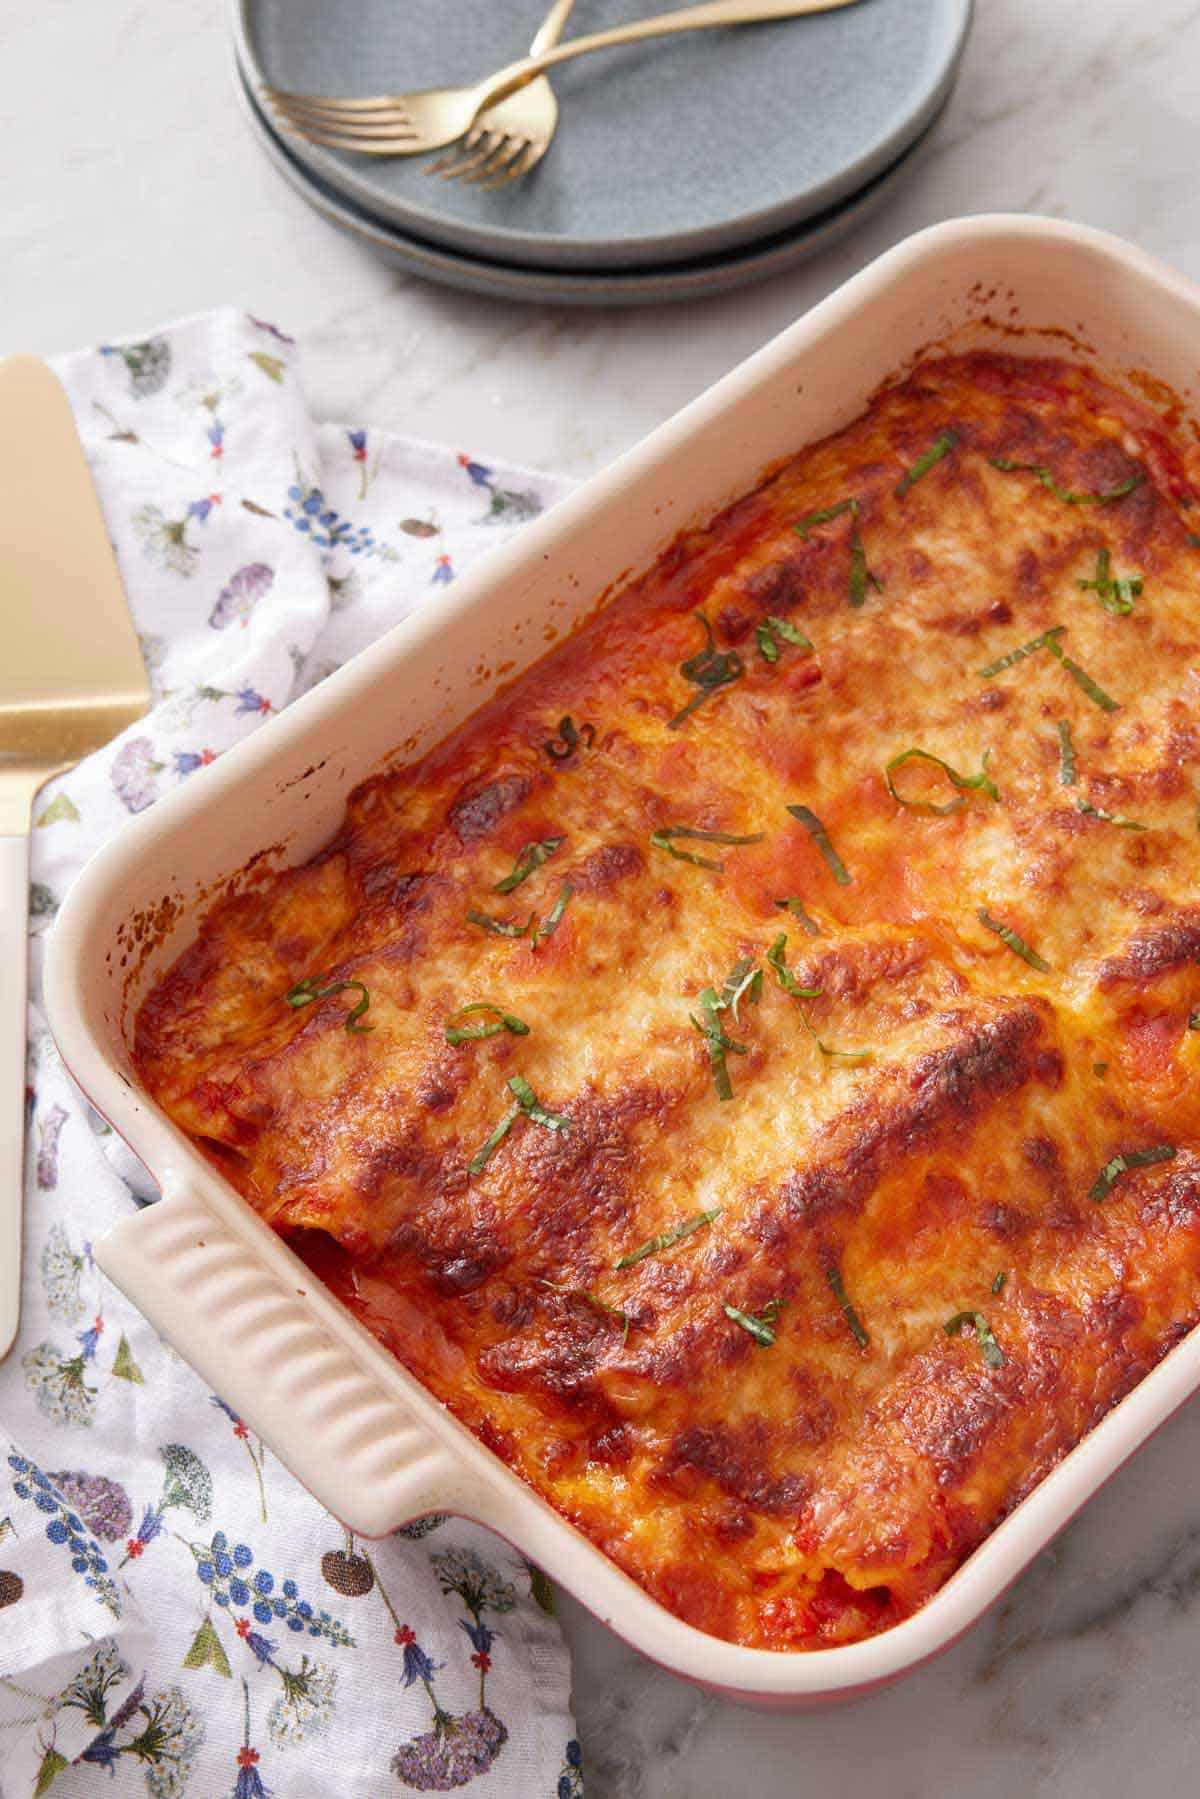 A baking dish of manicotti with a stack of plates and forks in the background.